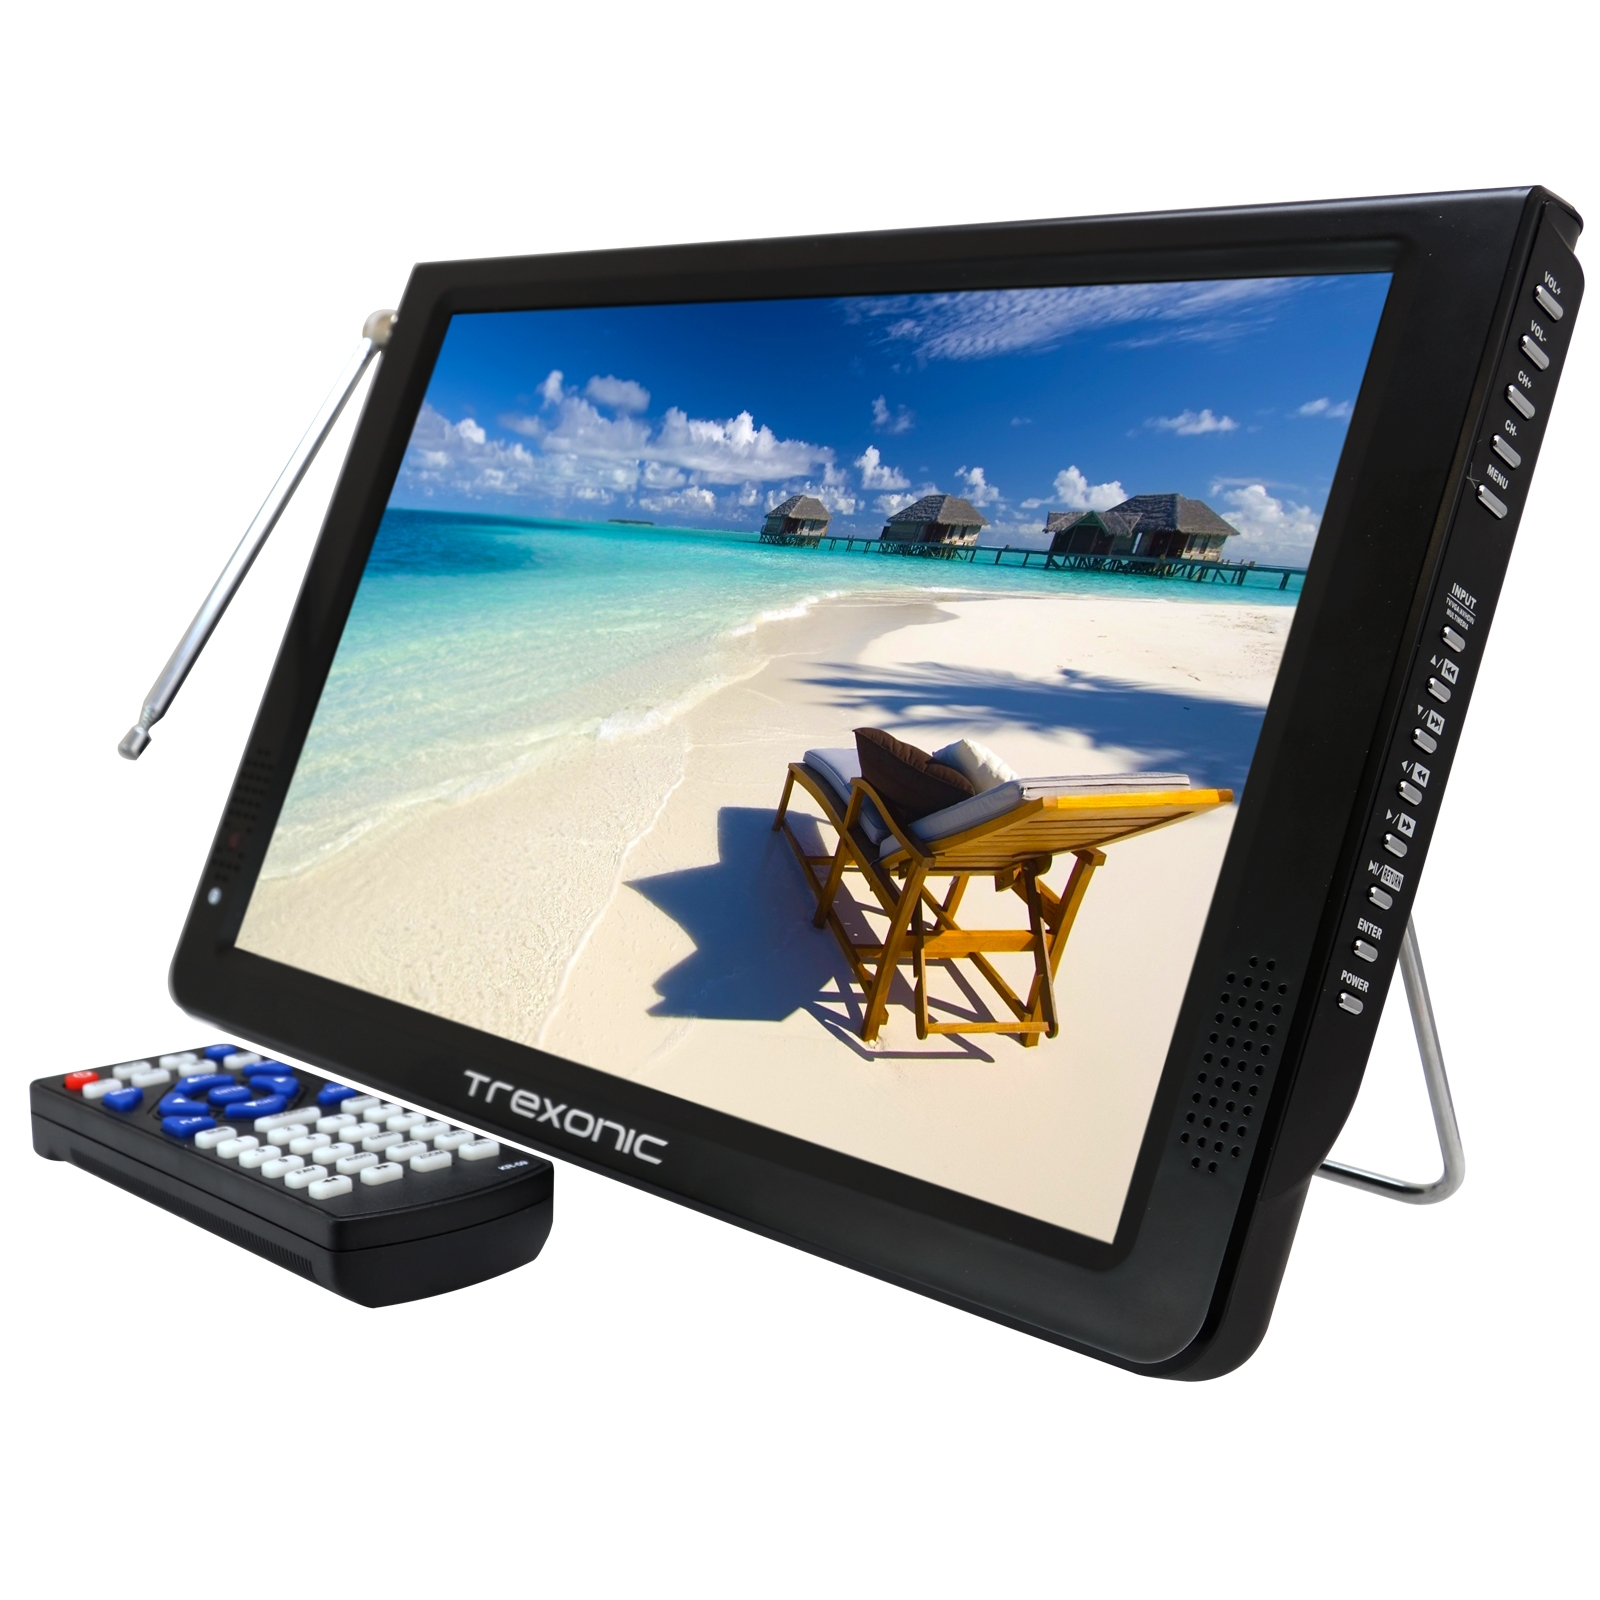 Trexonic Ultra Lightweight Rechargeable Widescreen 12 LED Portable TV with HDMI SD MMC USB VGA Headphone Jack AV Inputs and Output and Builtin Digital Tuner and Detachable Antenna - image 1 of 8